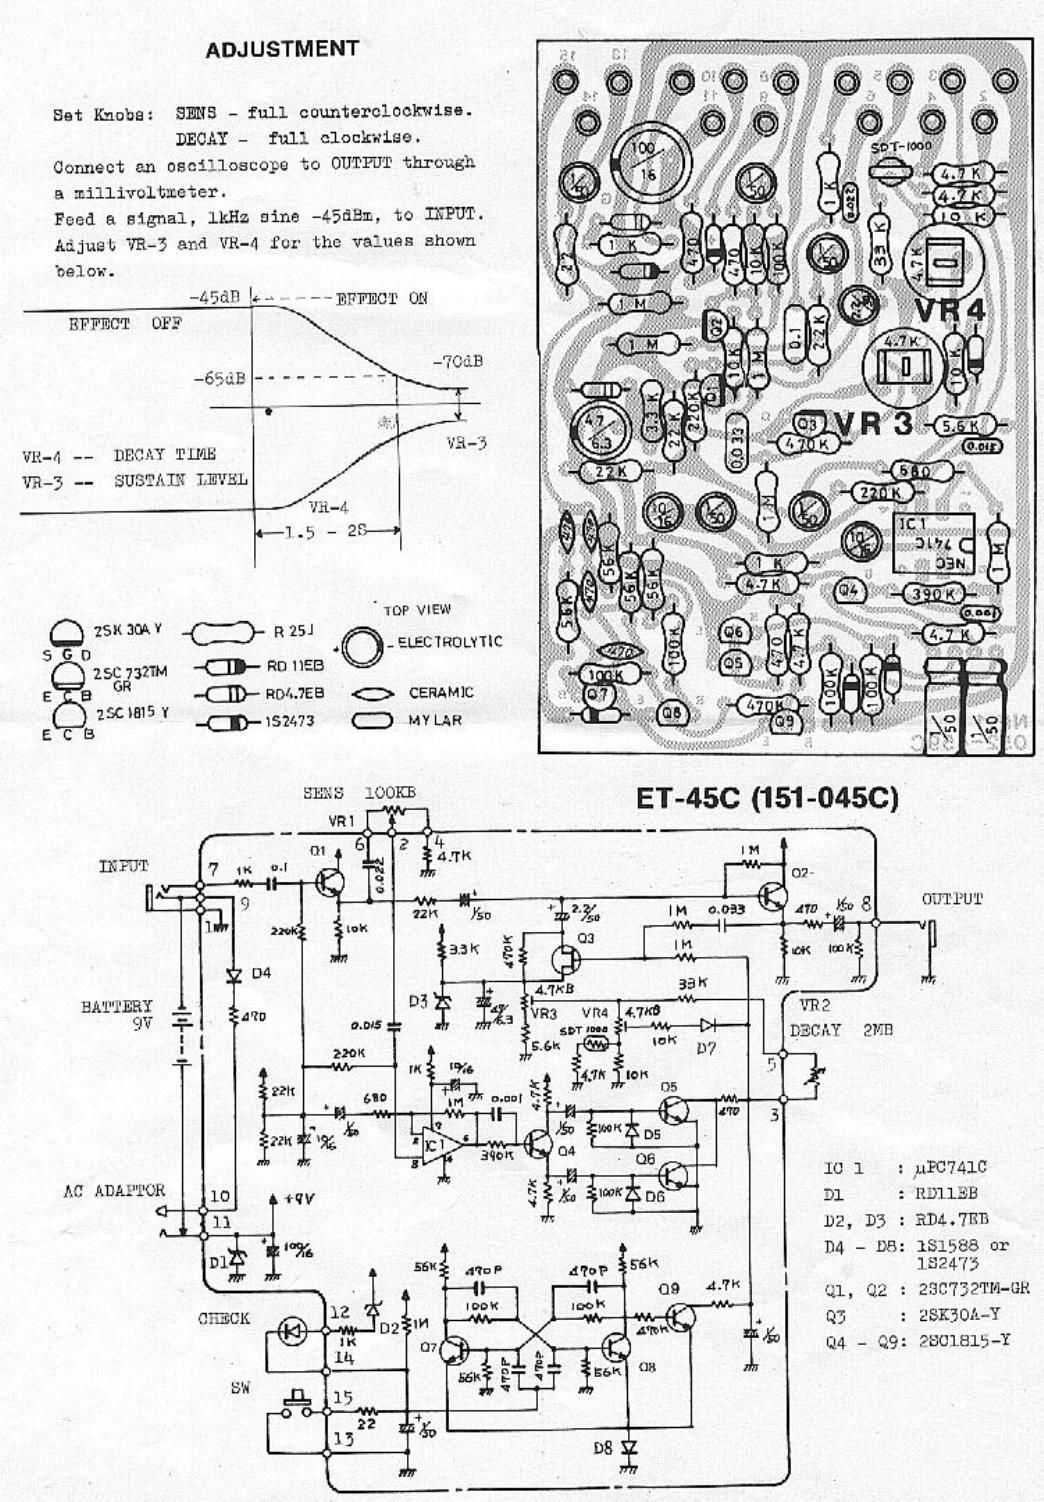 Boss NF 1 Noise Gate Schematic